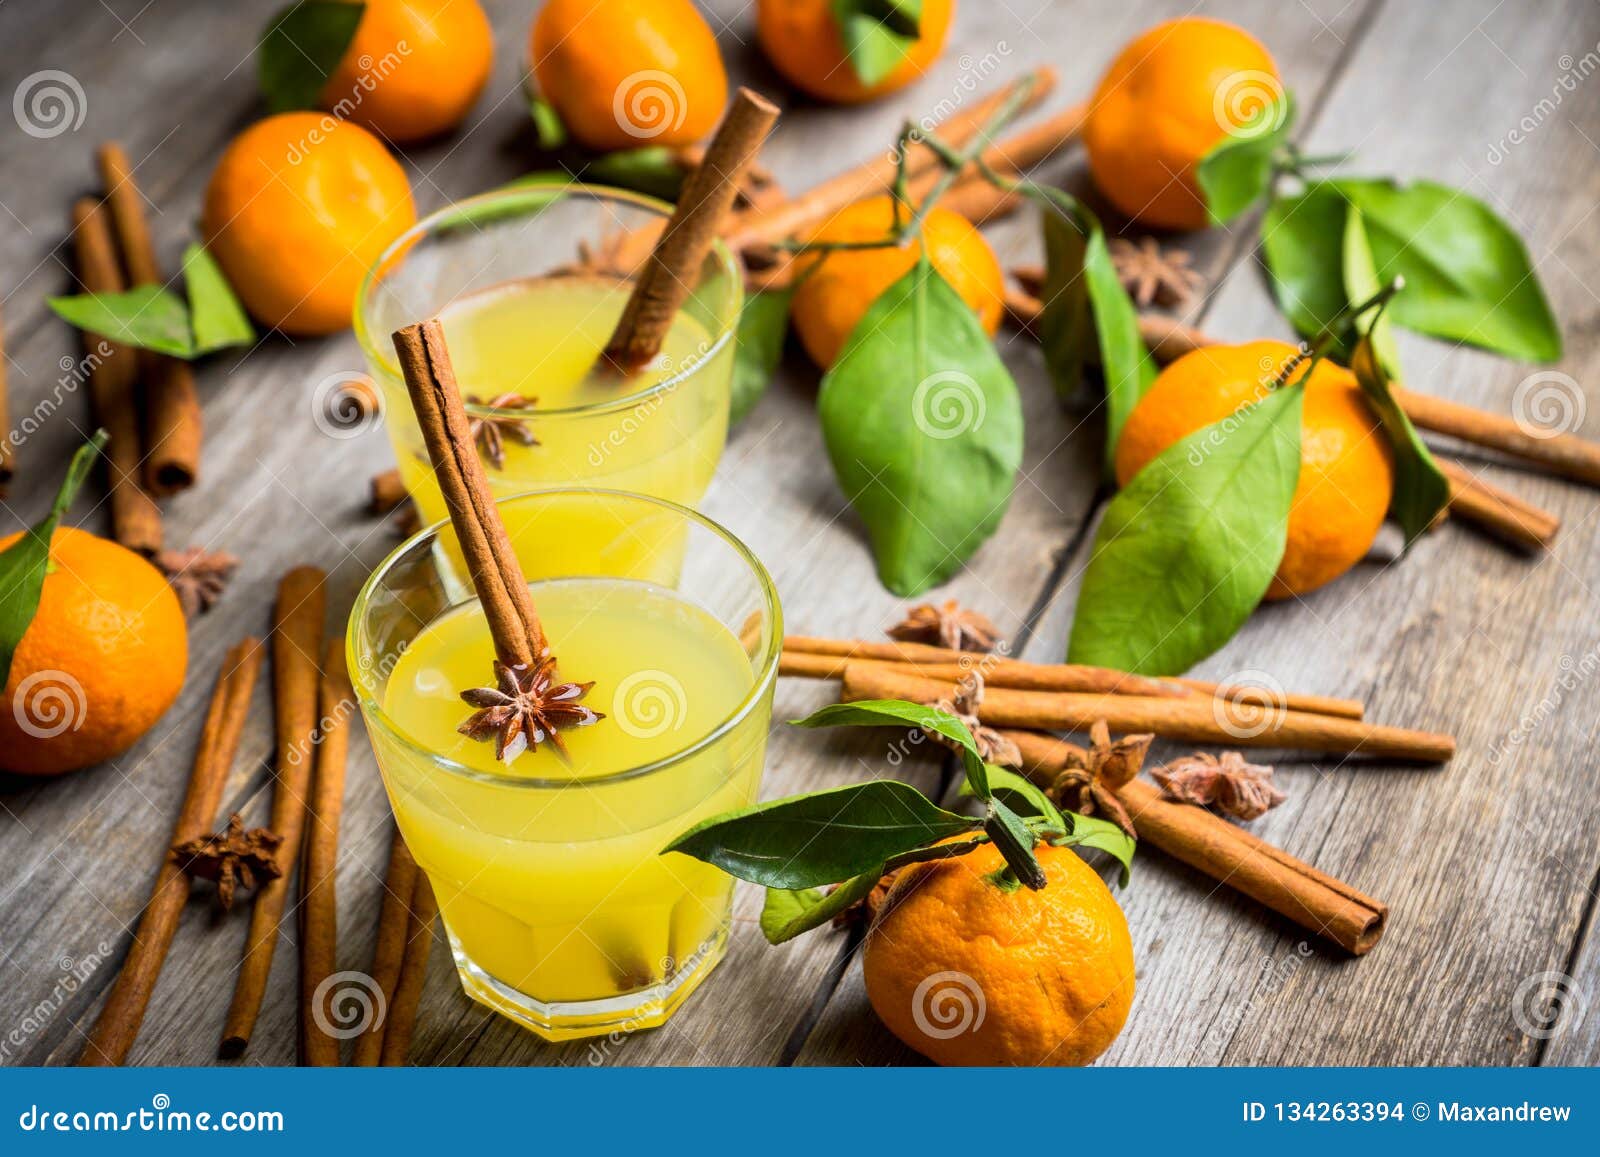 Old Fashioned Citrus Beverage with Spices Stock Photo - Image of ...